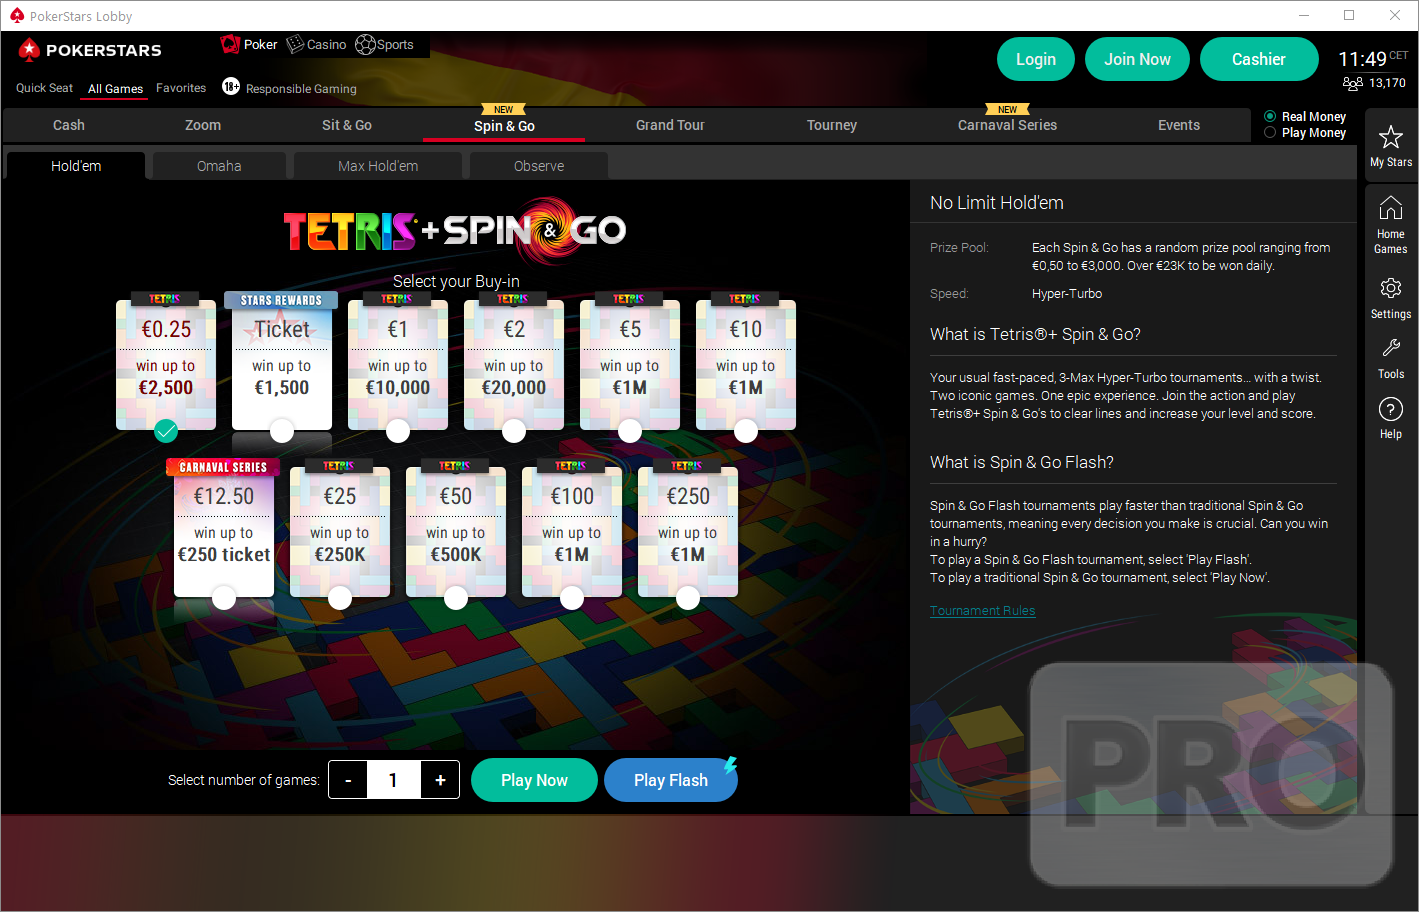 PokerStars Rolls Out New LSNG Leaderboard Promotion, Tetris + Spin & Go